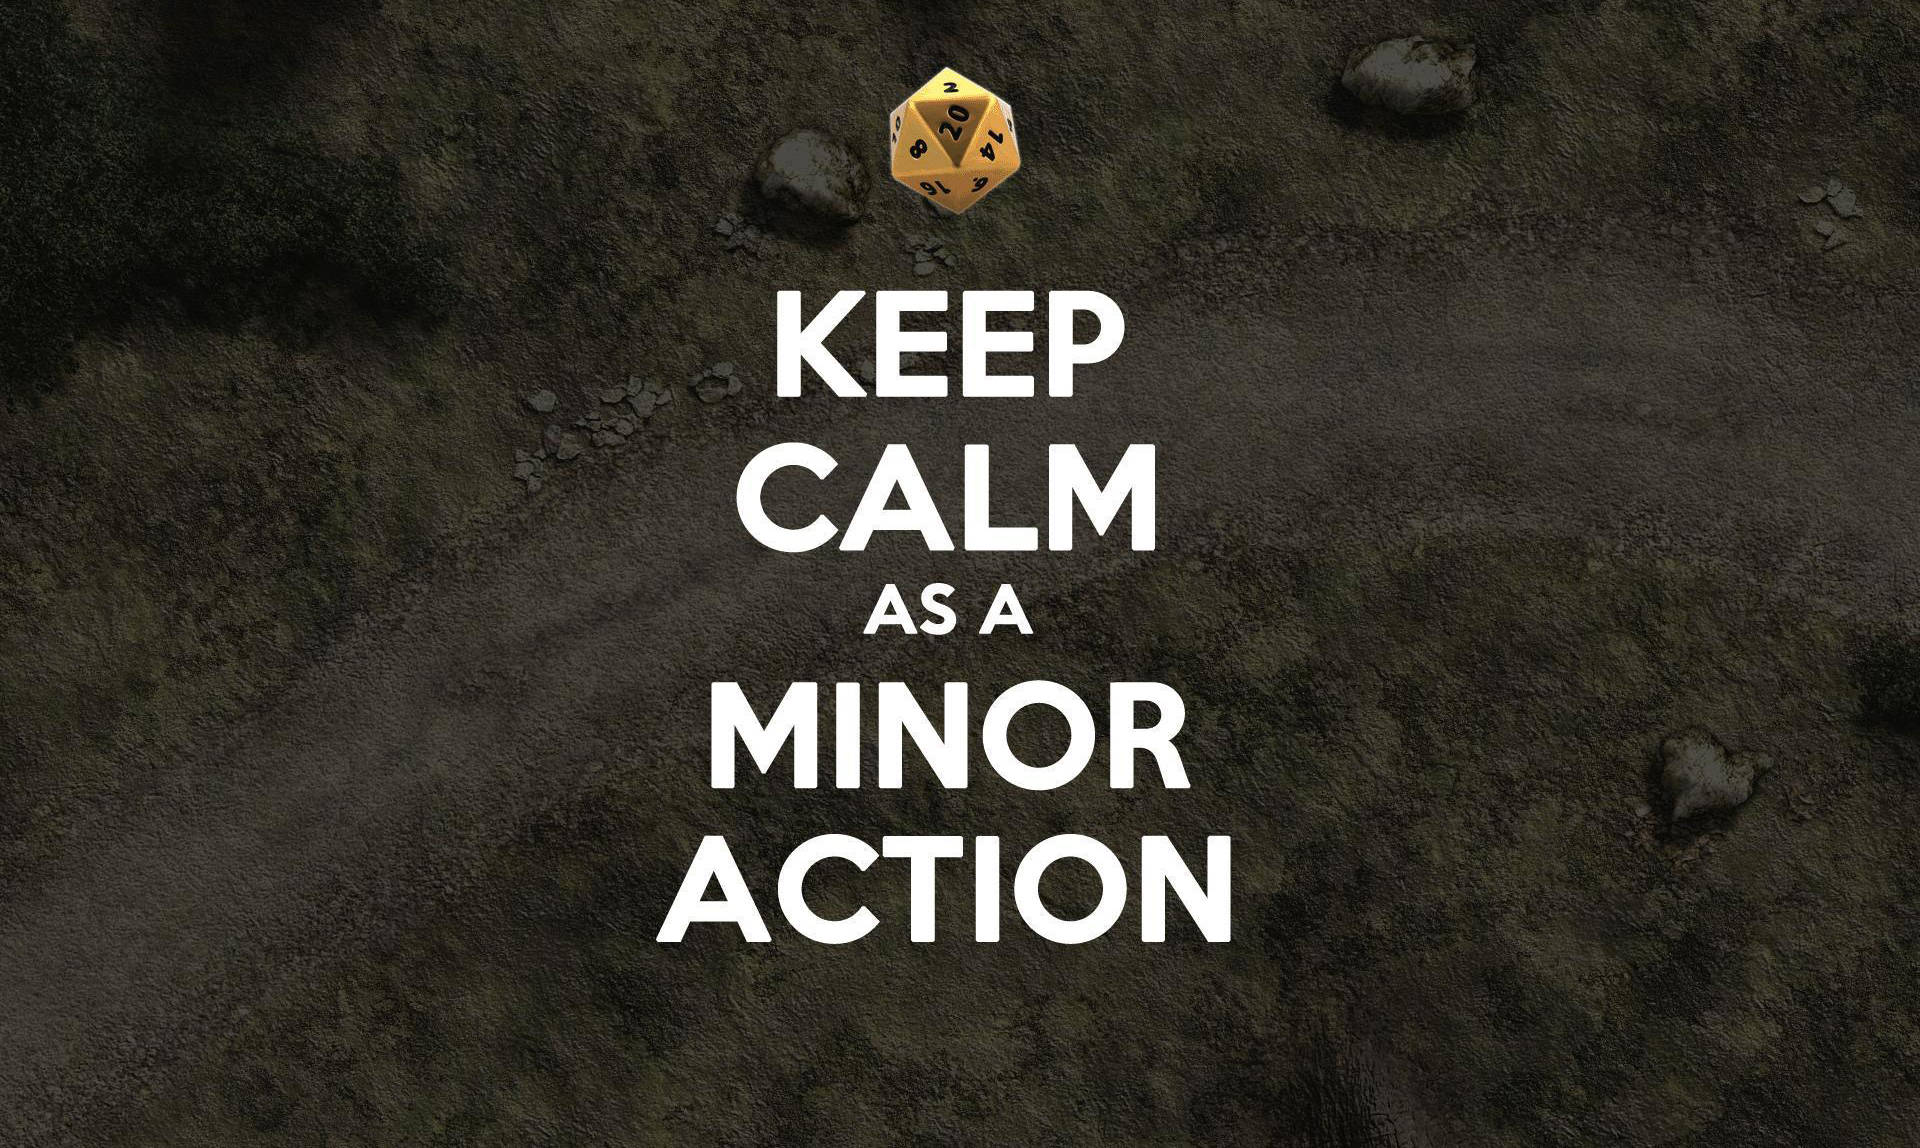 Keep calm as a minor action written in a dark black background, funny quotes meme.